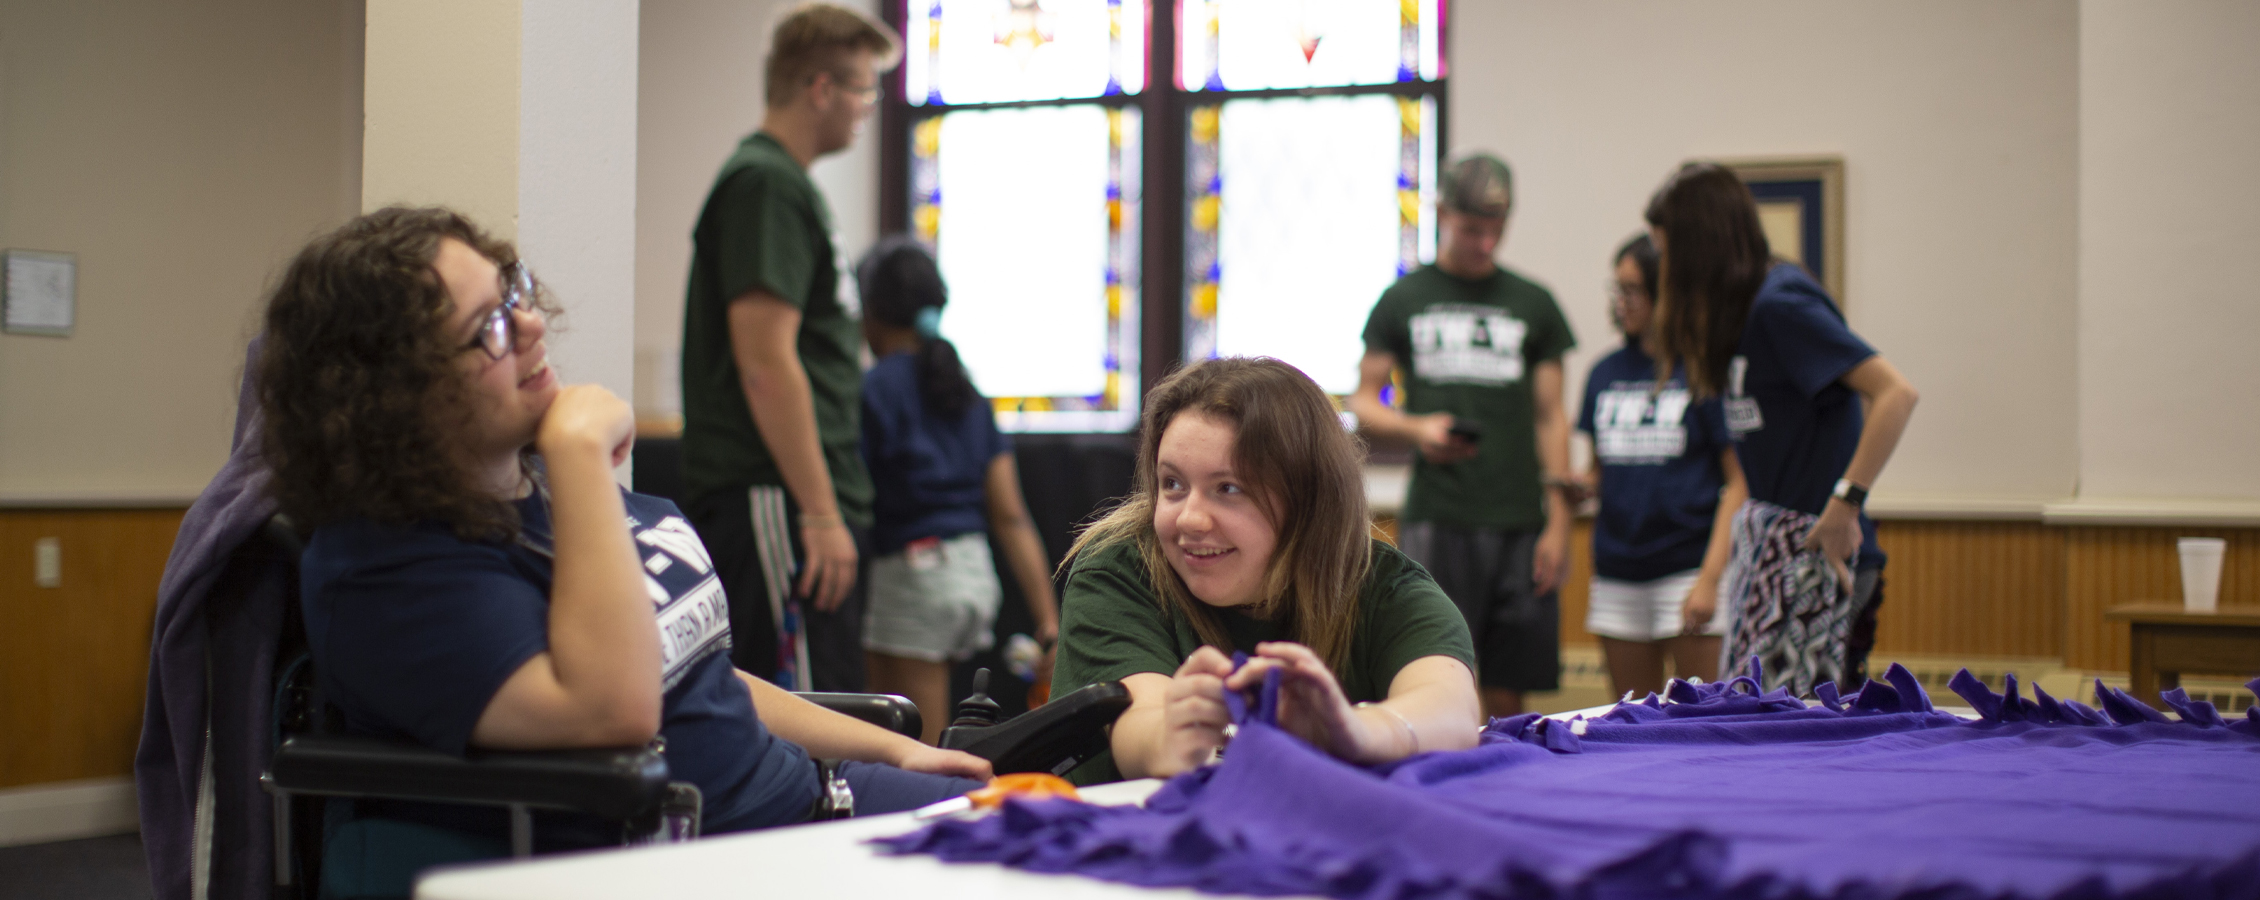 Two students help make blankets at a church.